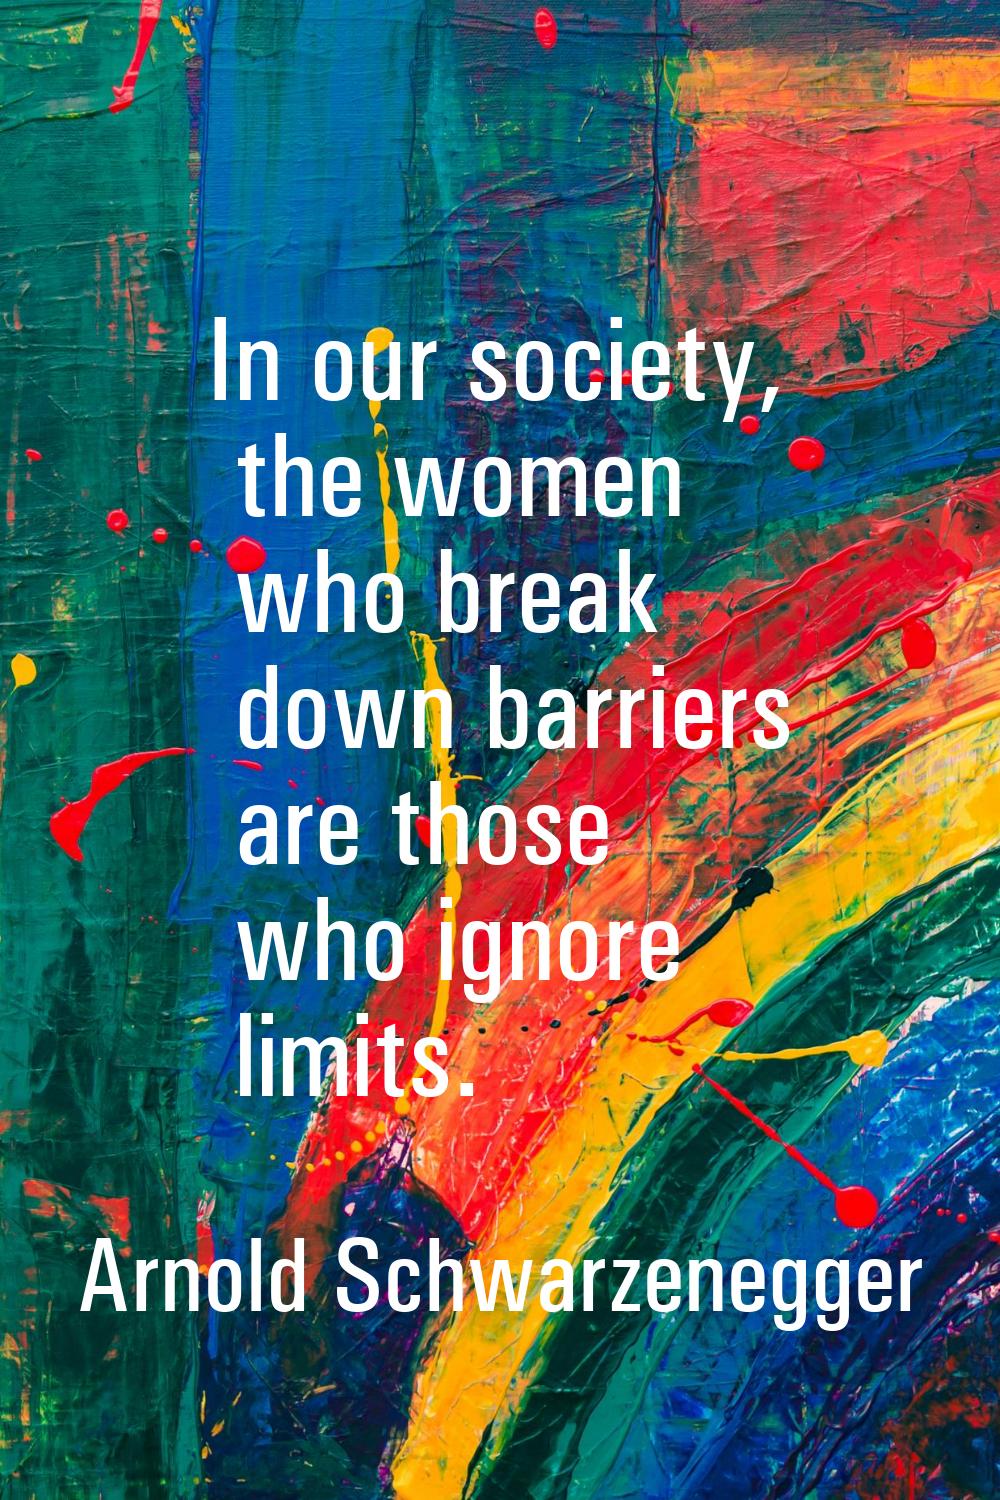 In our society, the women who break down barriers are those who ignore limits.